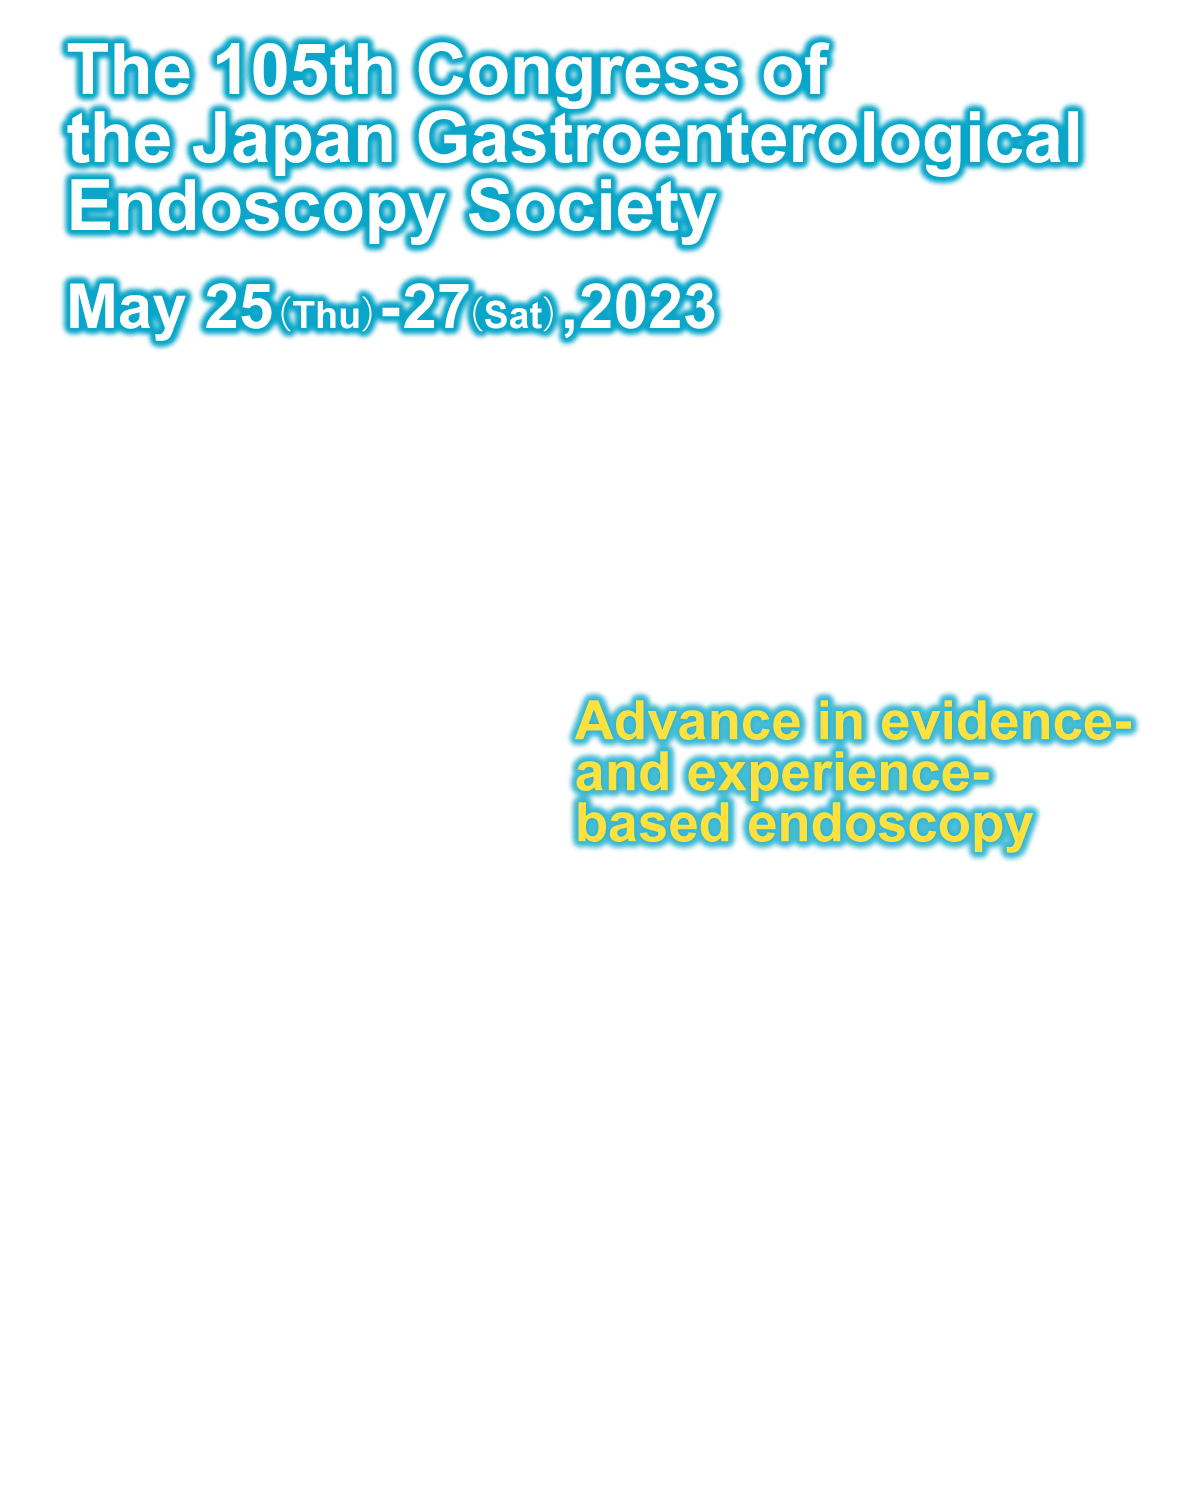 Advance in evidence- and experience-based endoscopy